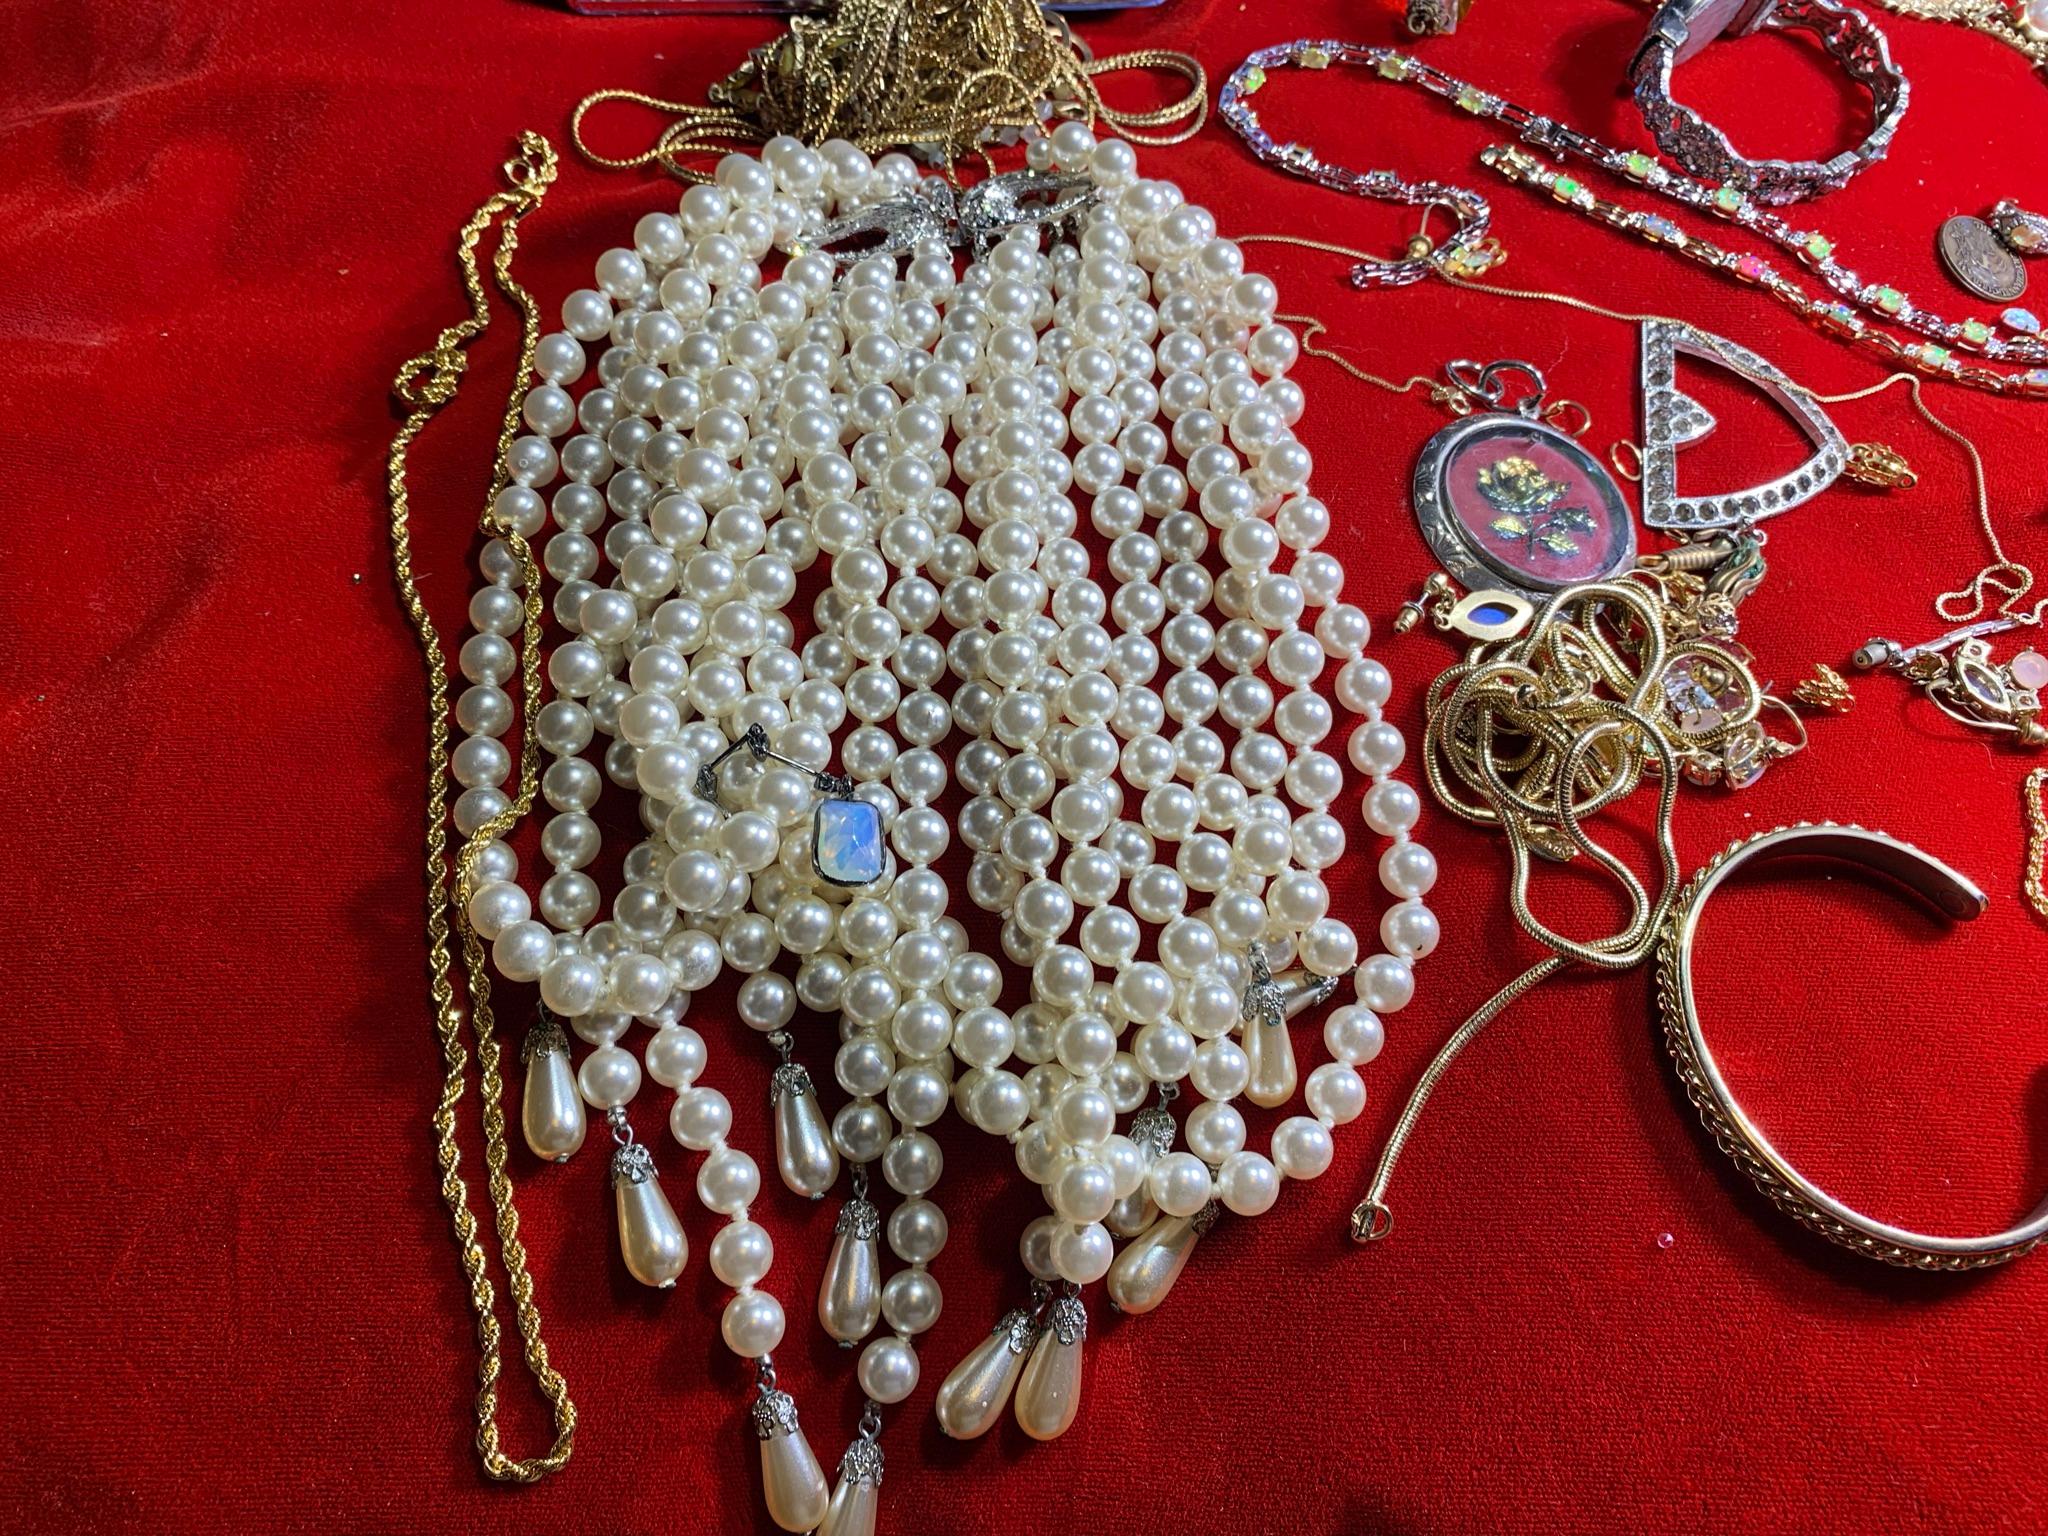 Great Group of Costume Jewelry Including Some Sterling